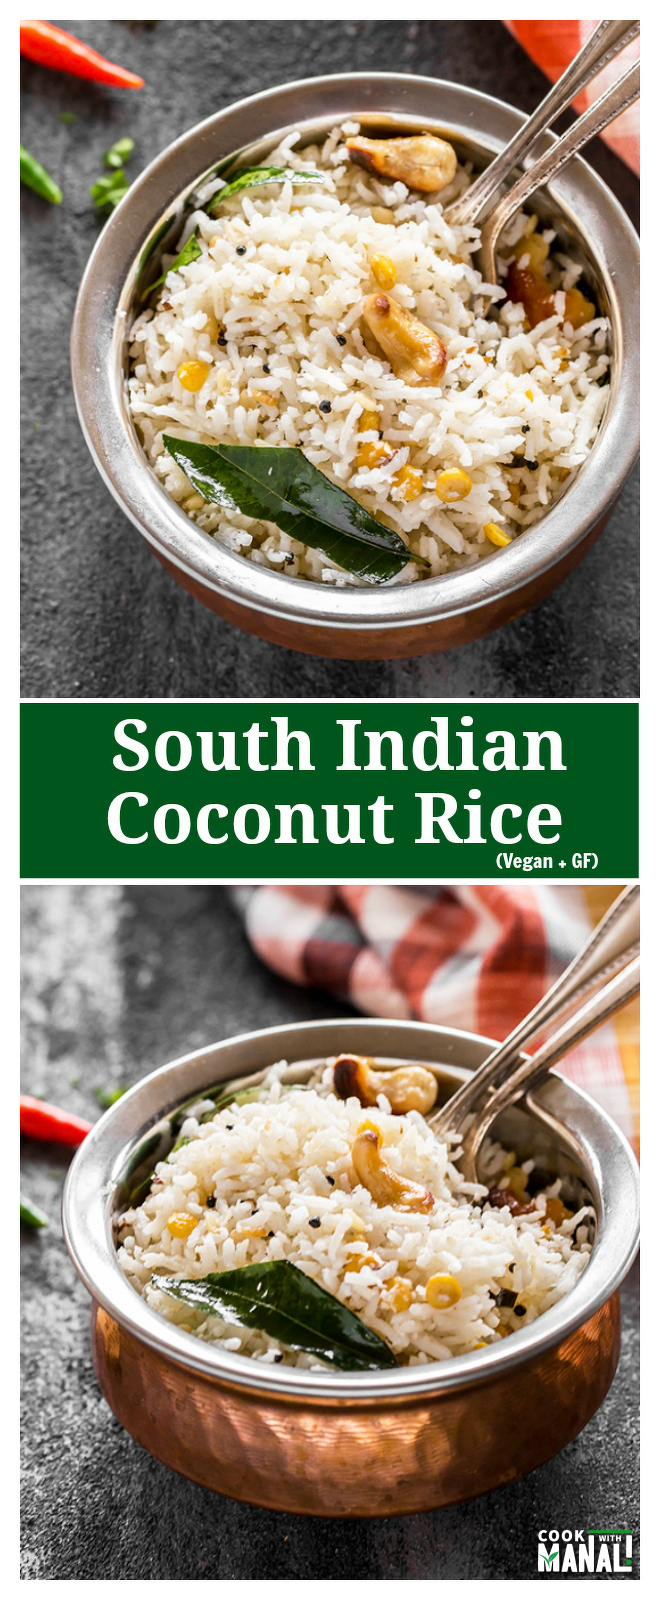 South Indian Coconut Rice - Cook With Manali